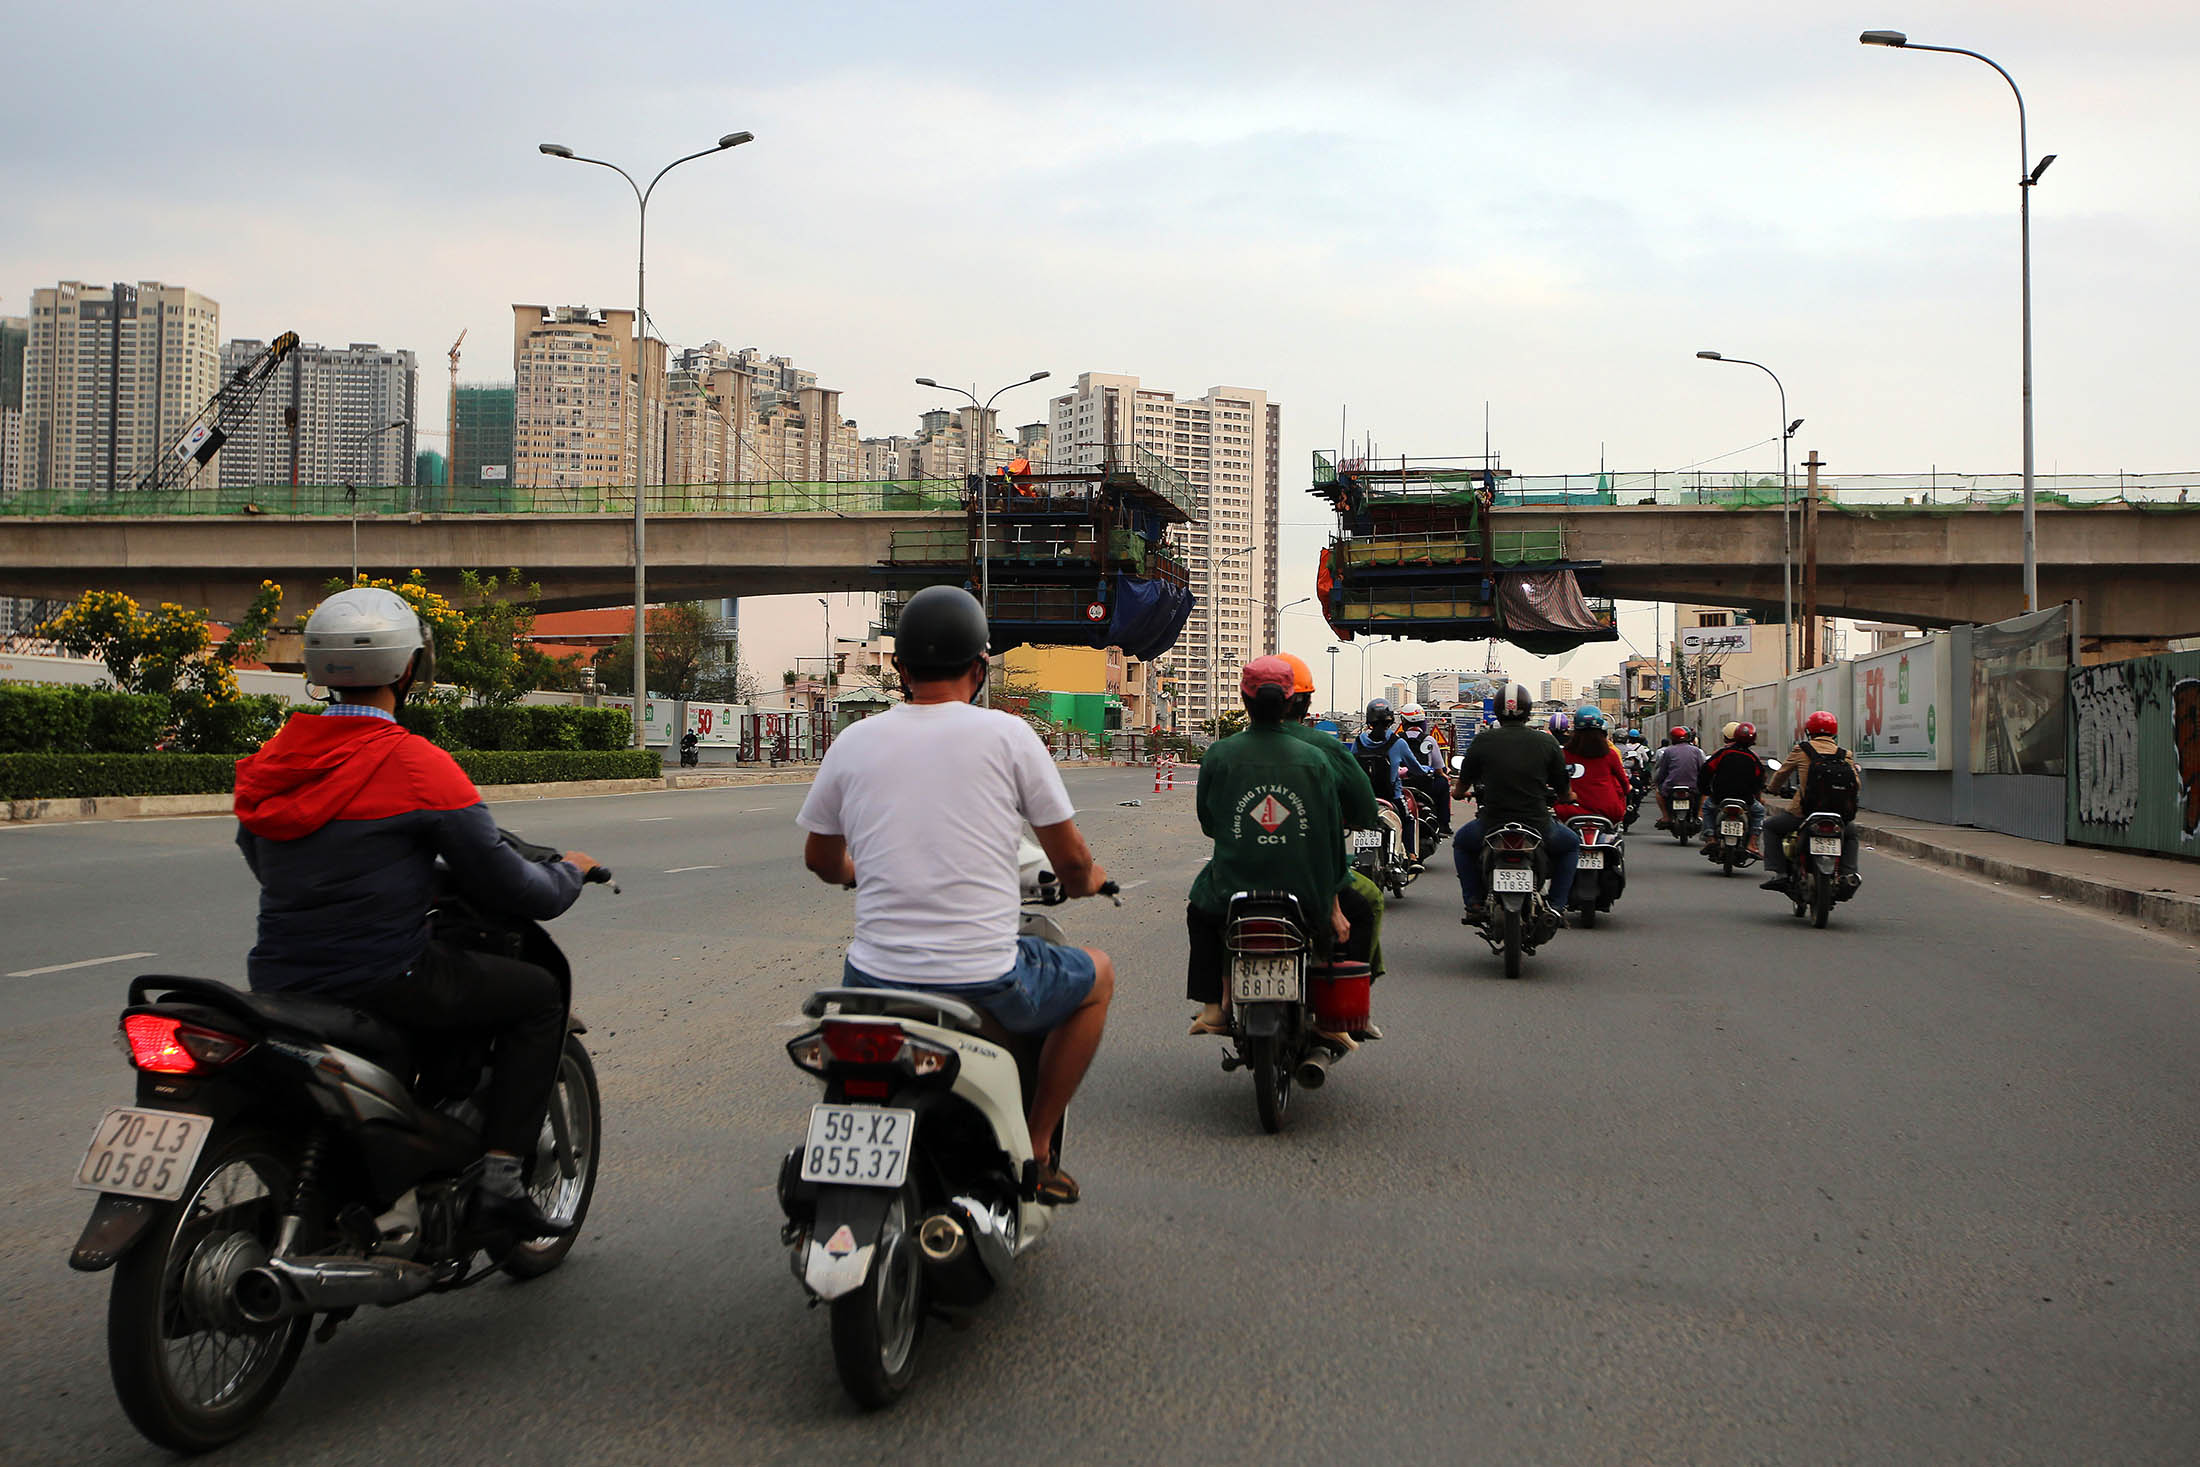 Construction continues on a bridge in Ho Chi Minh City.
